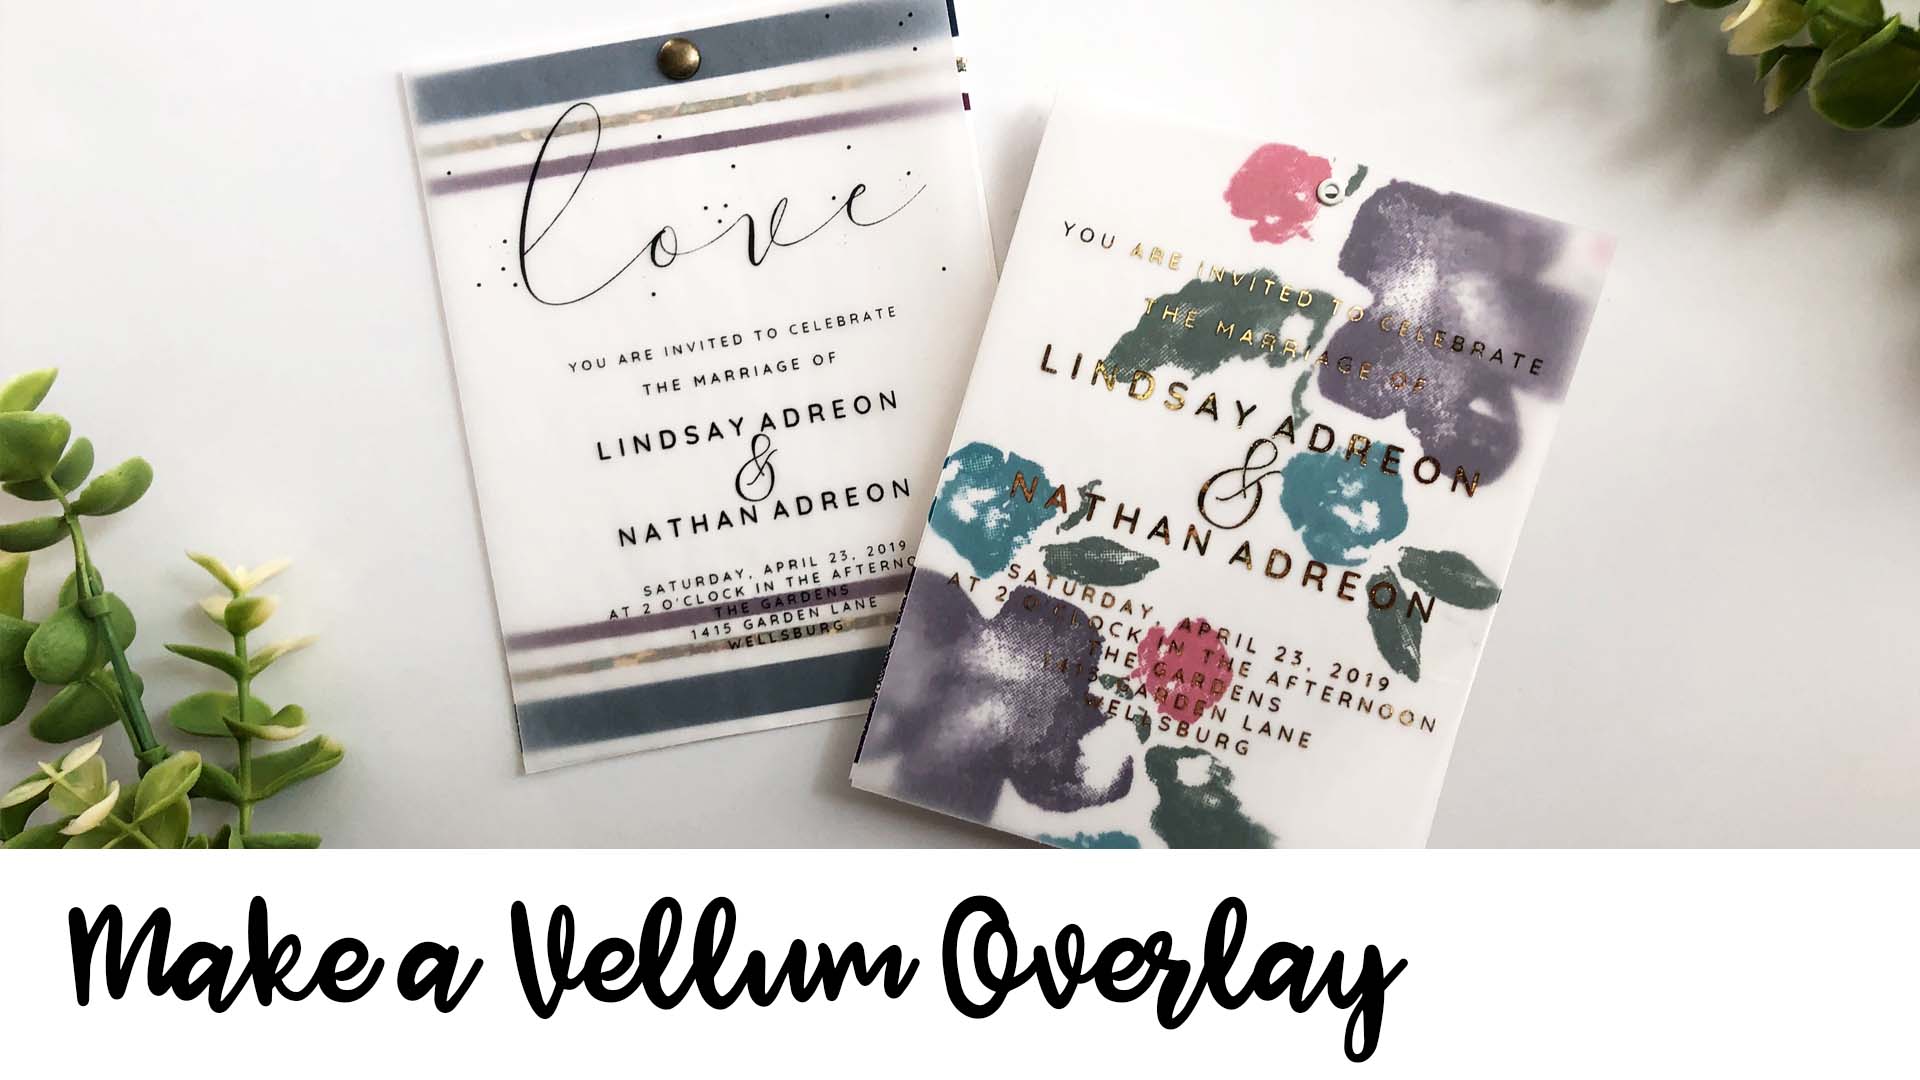 Handmade wedding invitaitons featuring a vellum overlay and several designs.